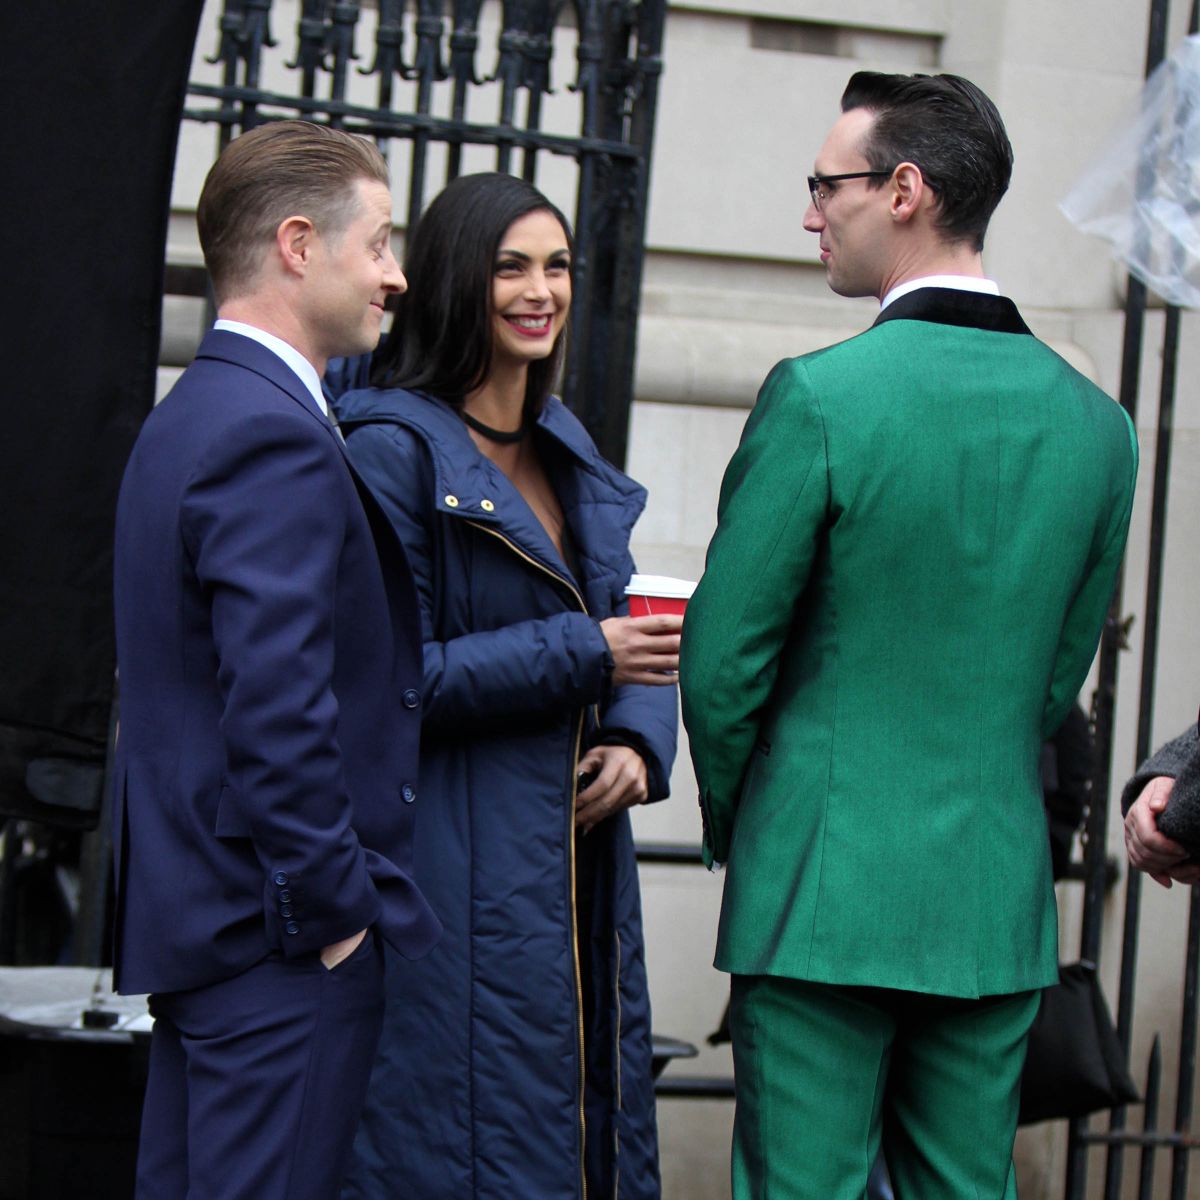 MORENA BACCARIN and Ben McKenzie on the Set of Gotham in Harlem 02/20/2018.